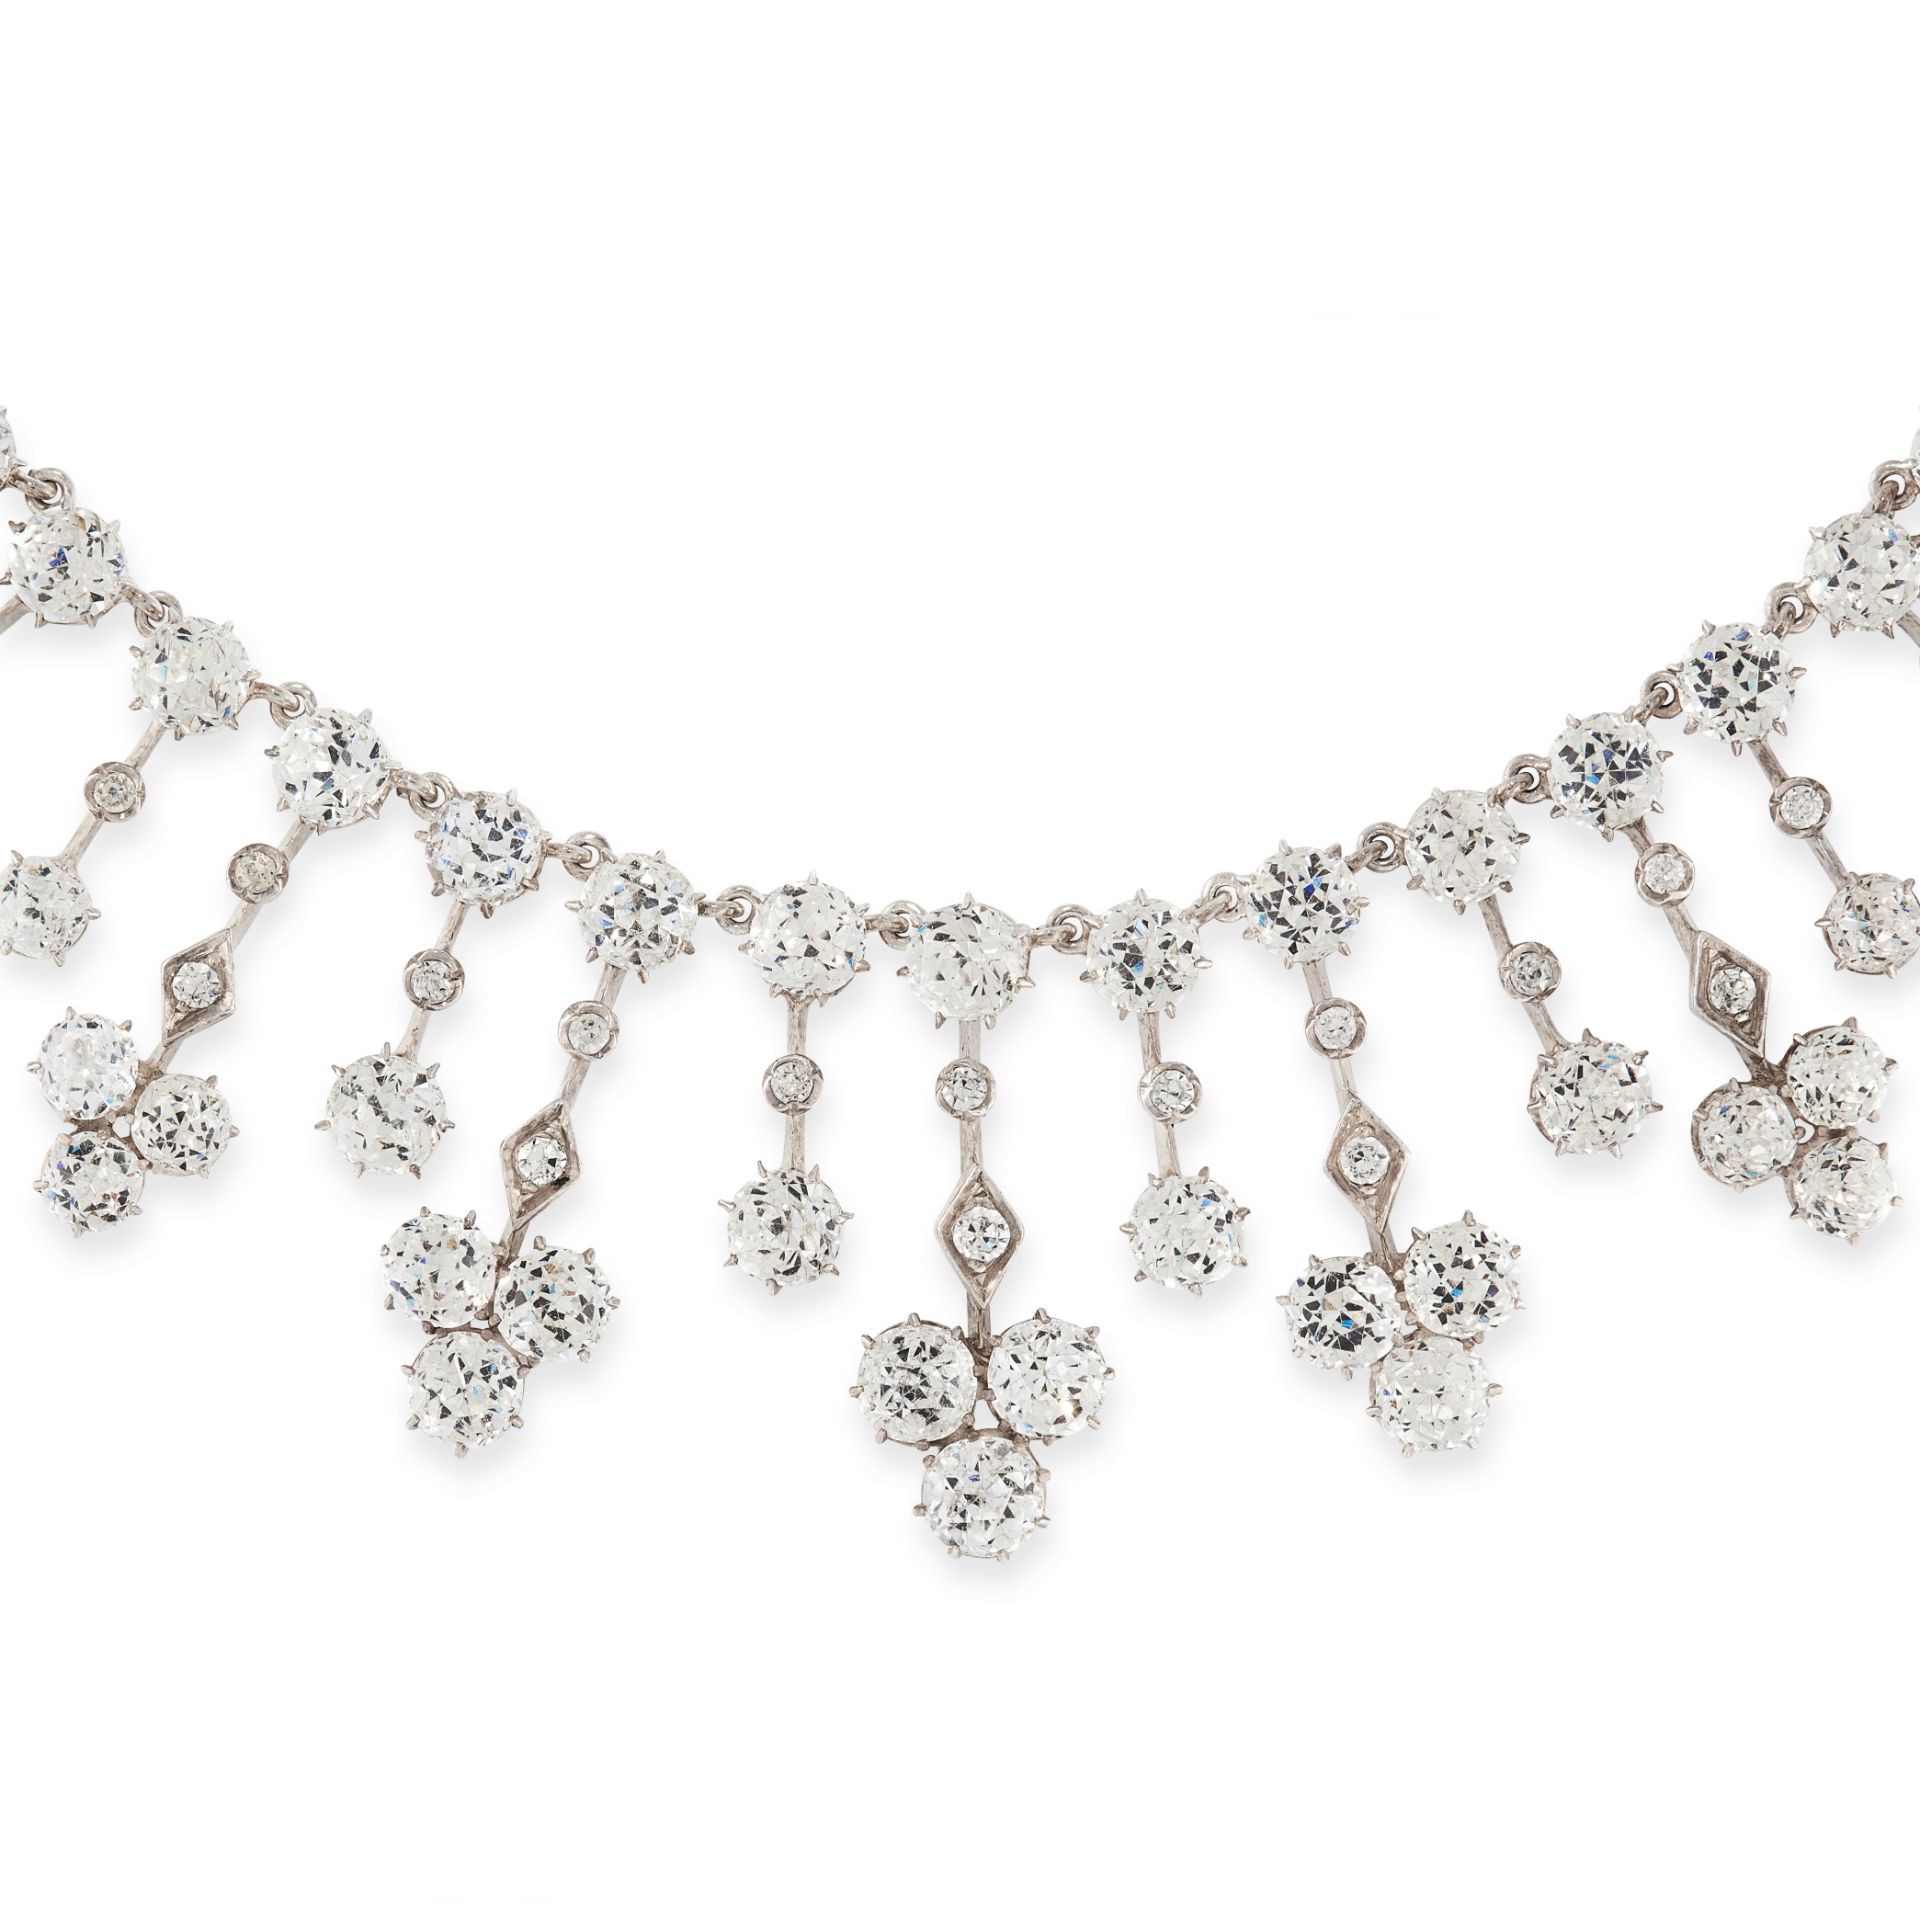 A PASTE DIAMOND RIVIERE NECKLACE in silver, comprising a row of fifty-one old cut paste gemstones, - Image 2 of 2